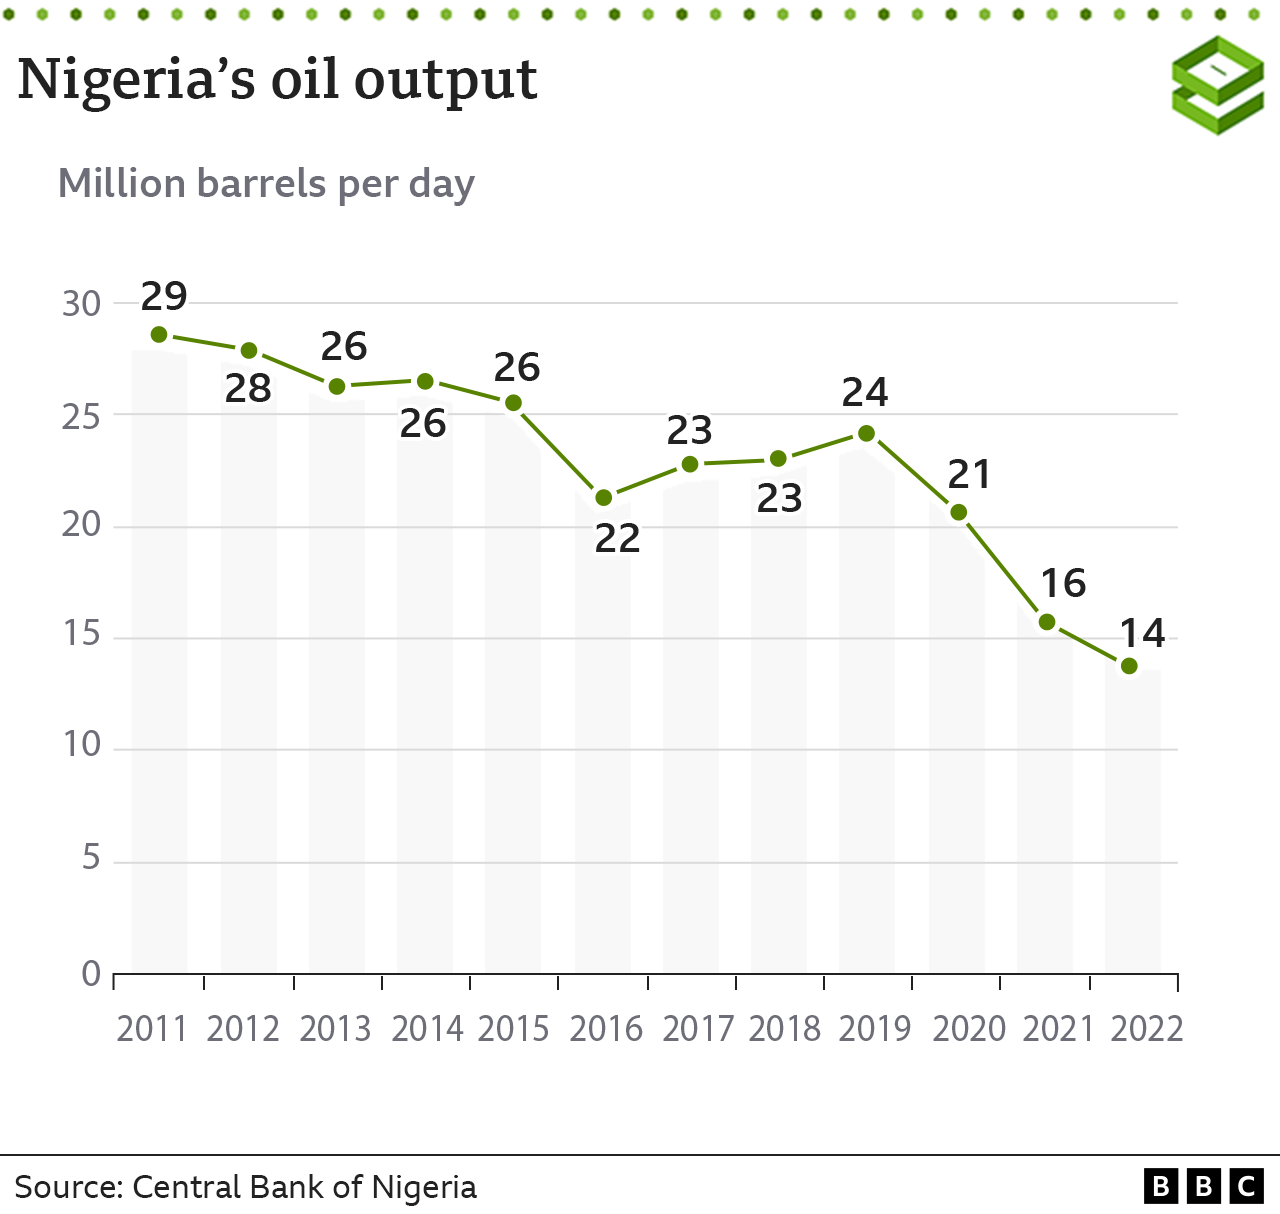 Graph showing Nigeria's oil output